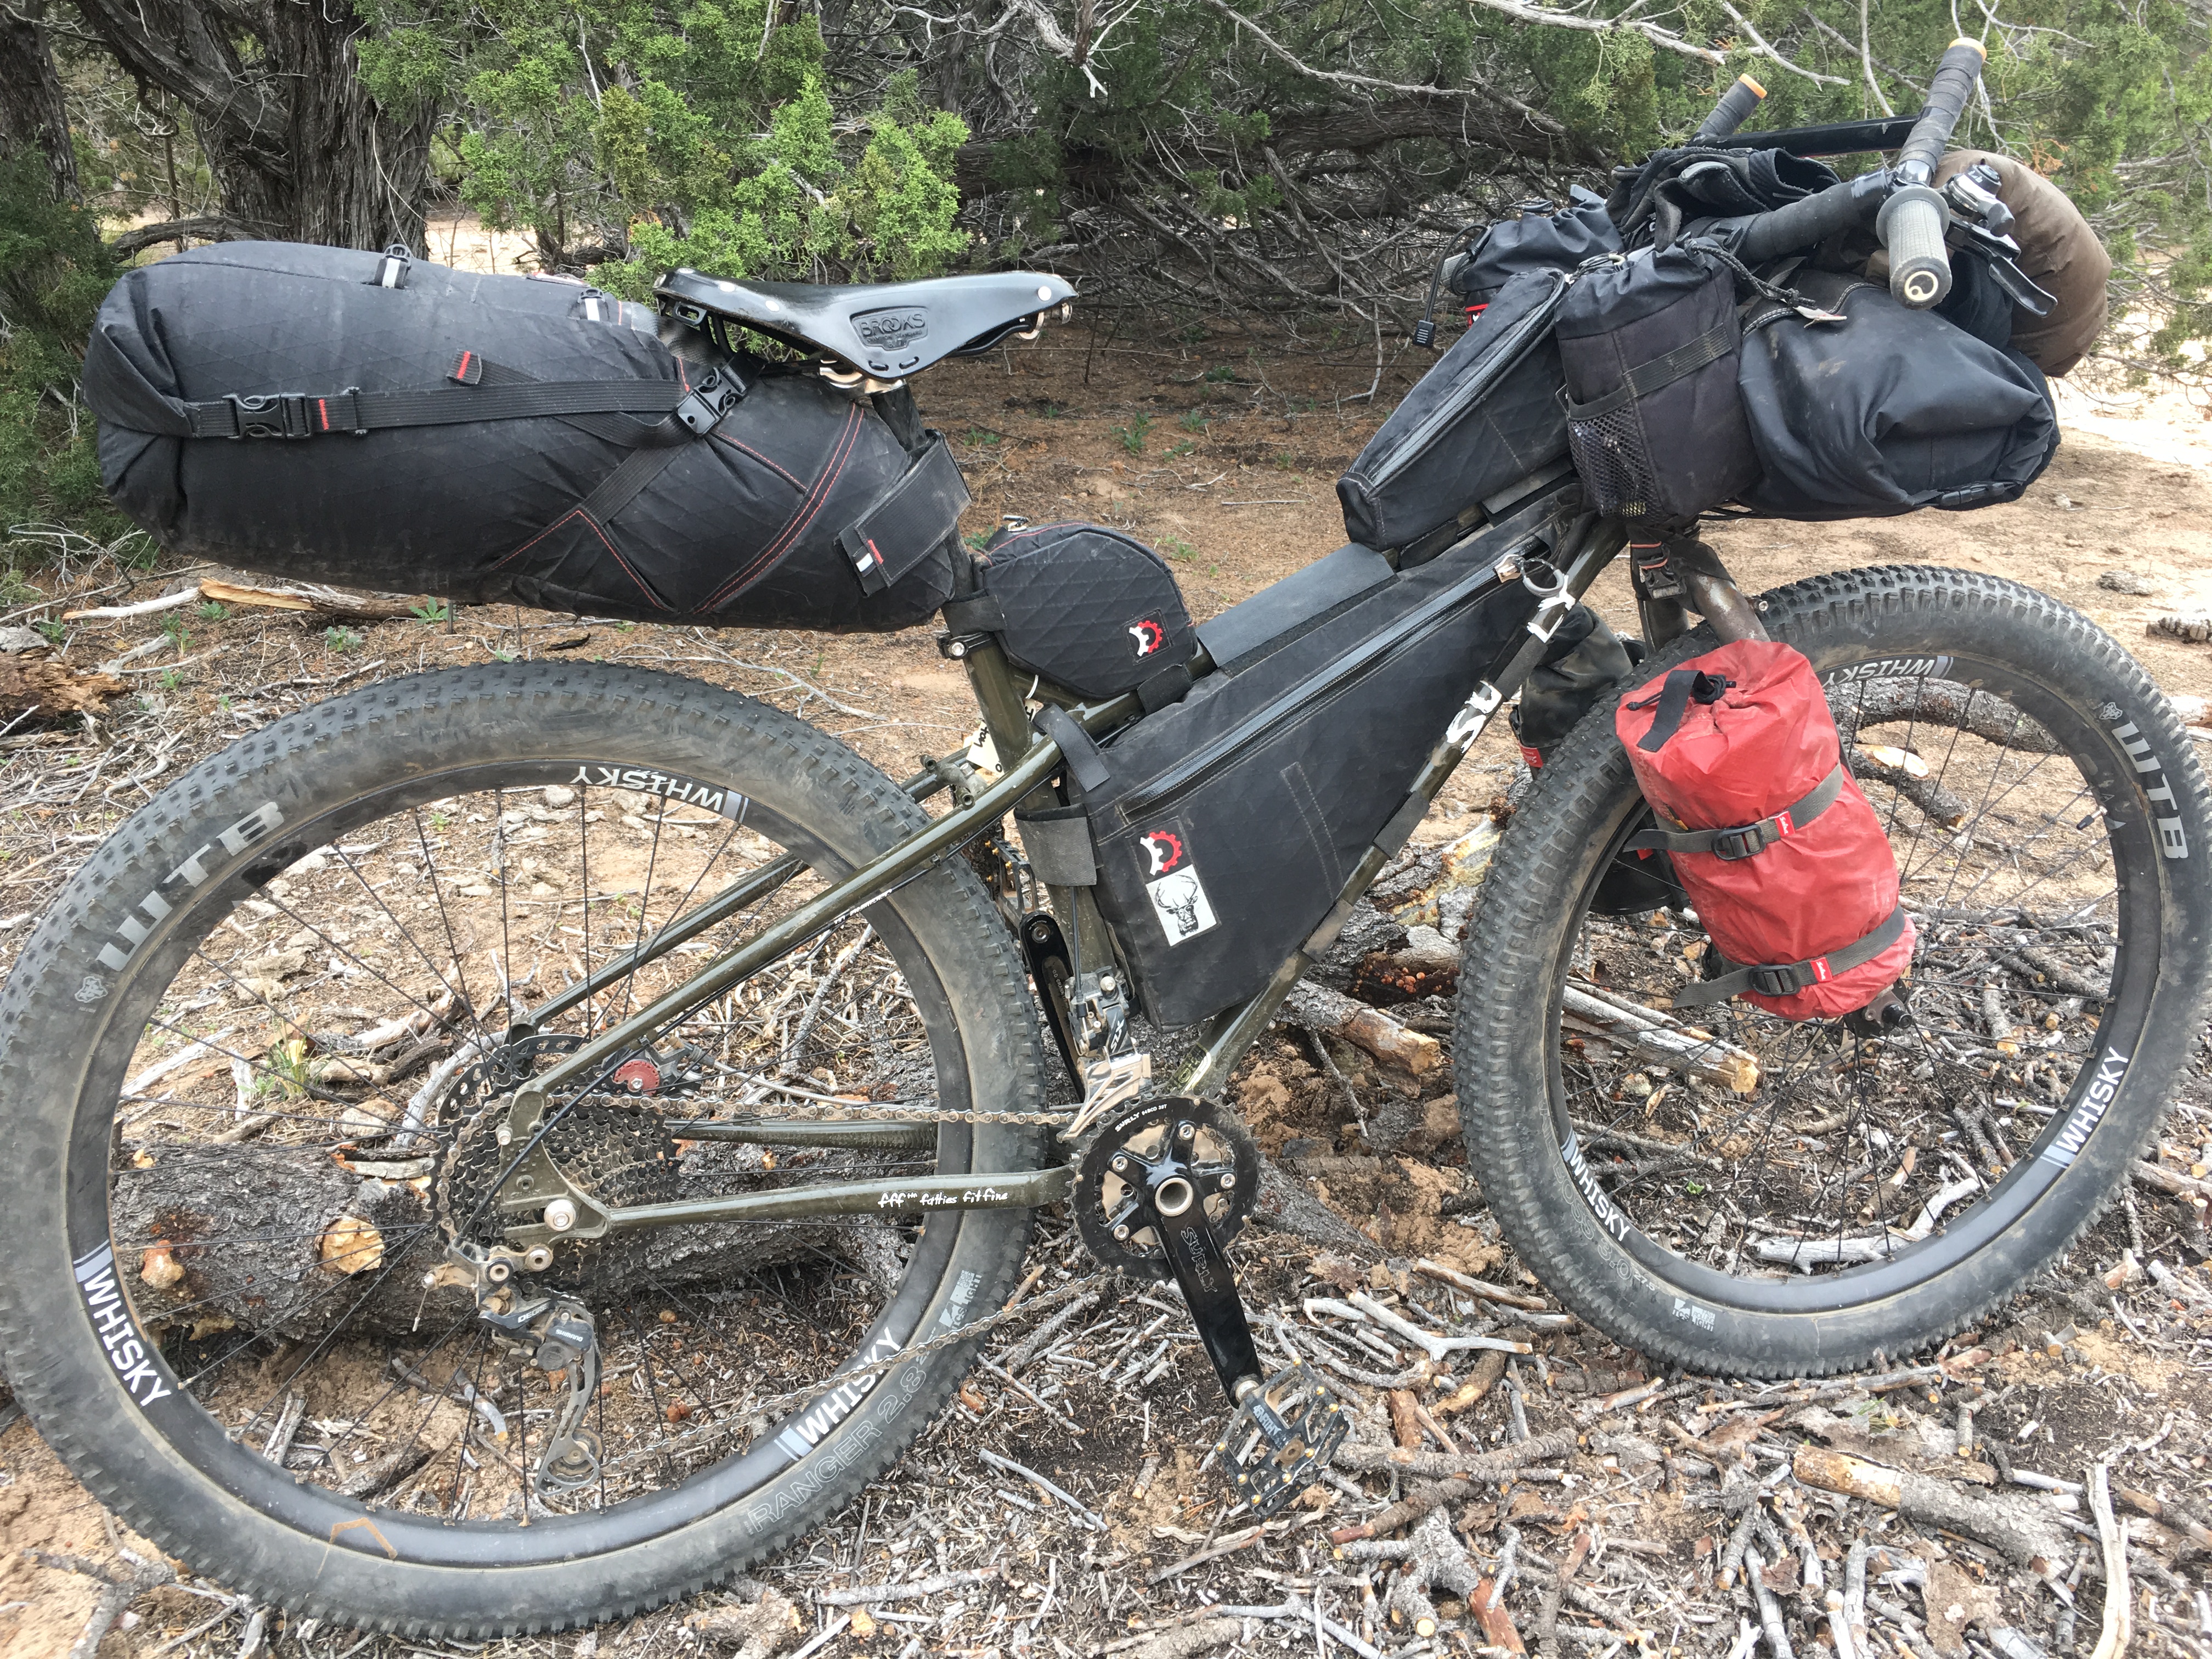 Right side view of a Surly bike, black, loaded with gear, standing in sticks and dirt with brushy trees in background